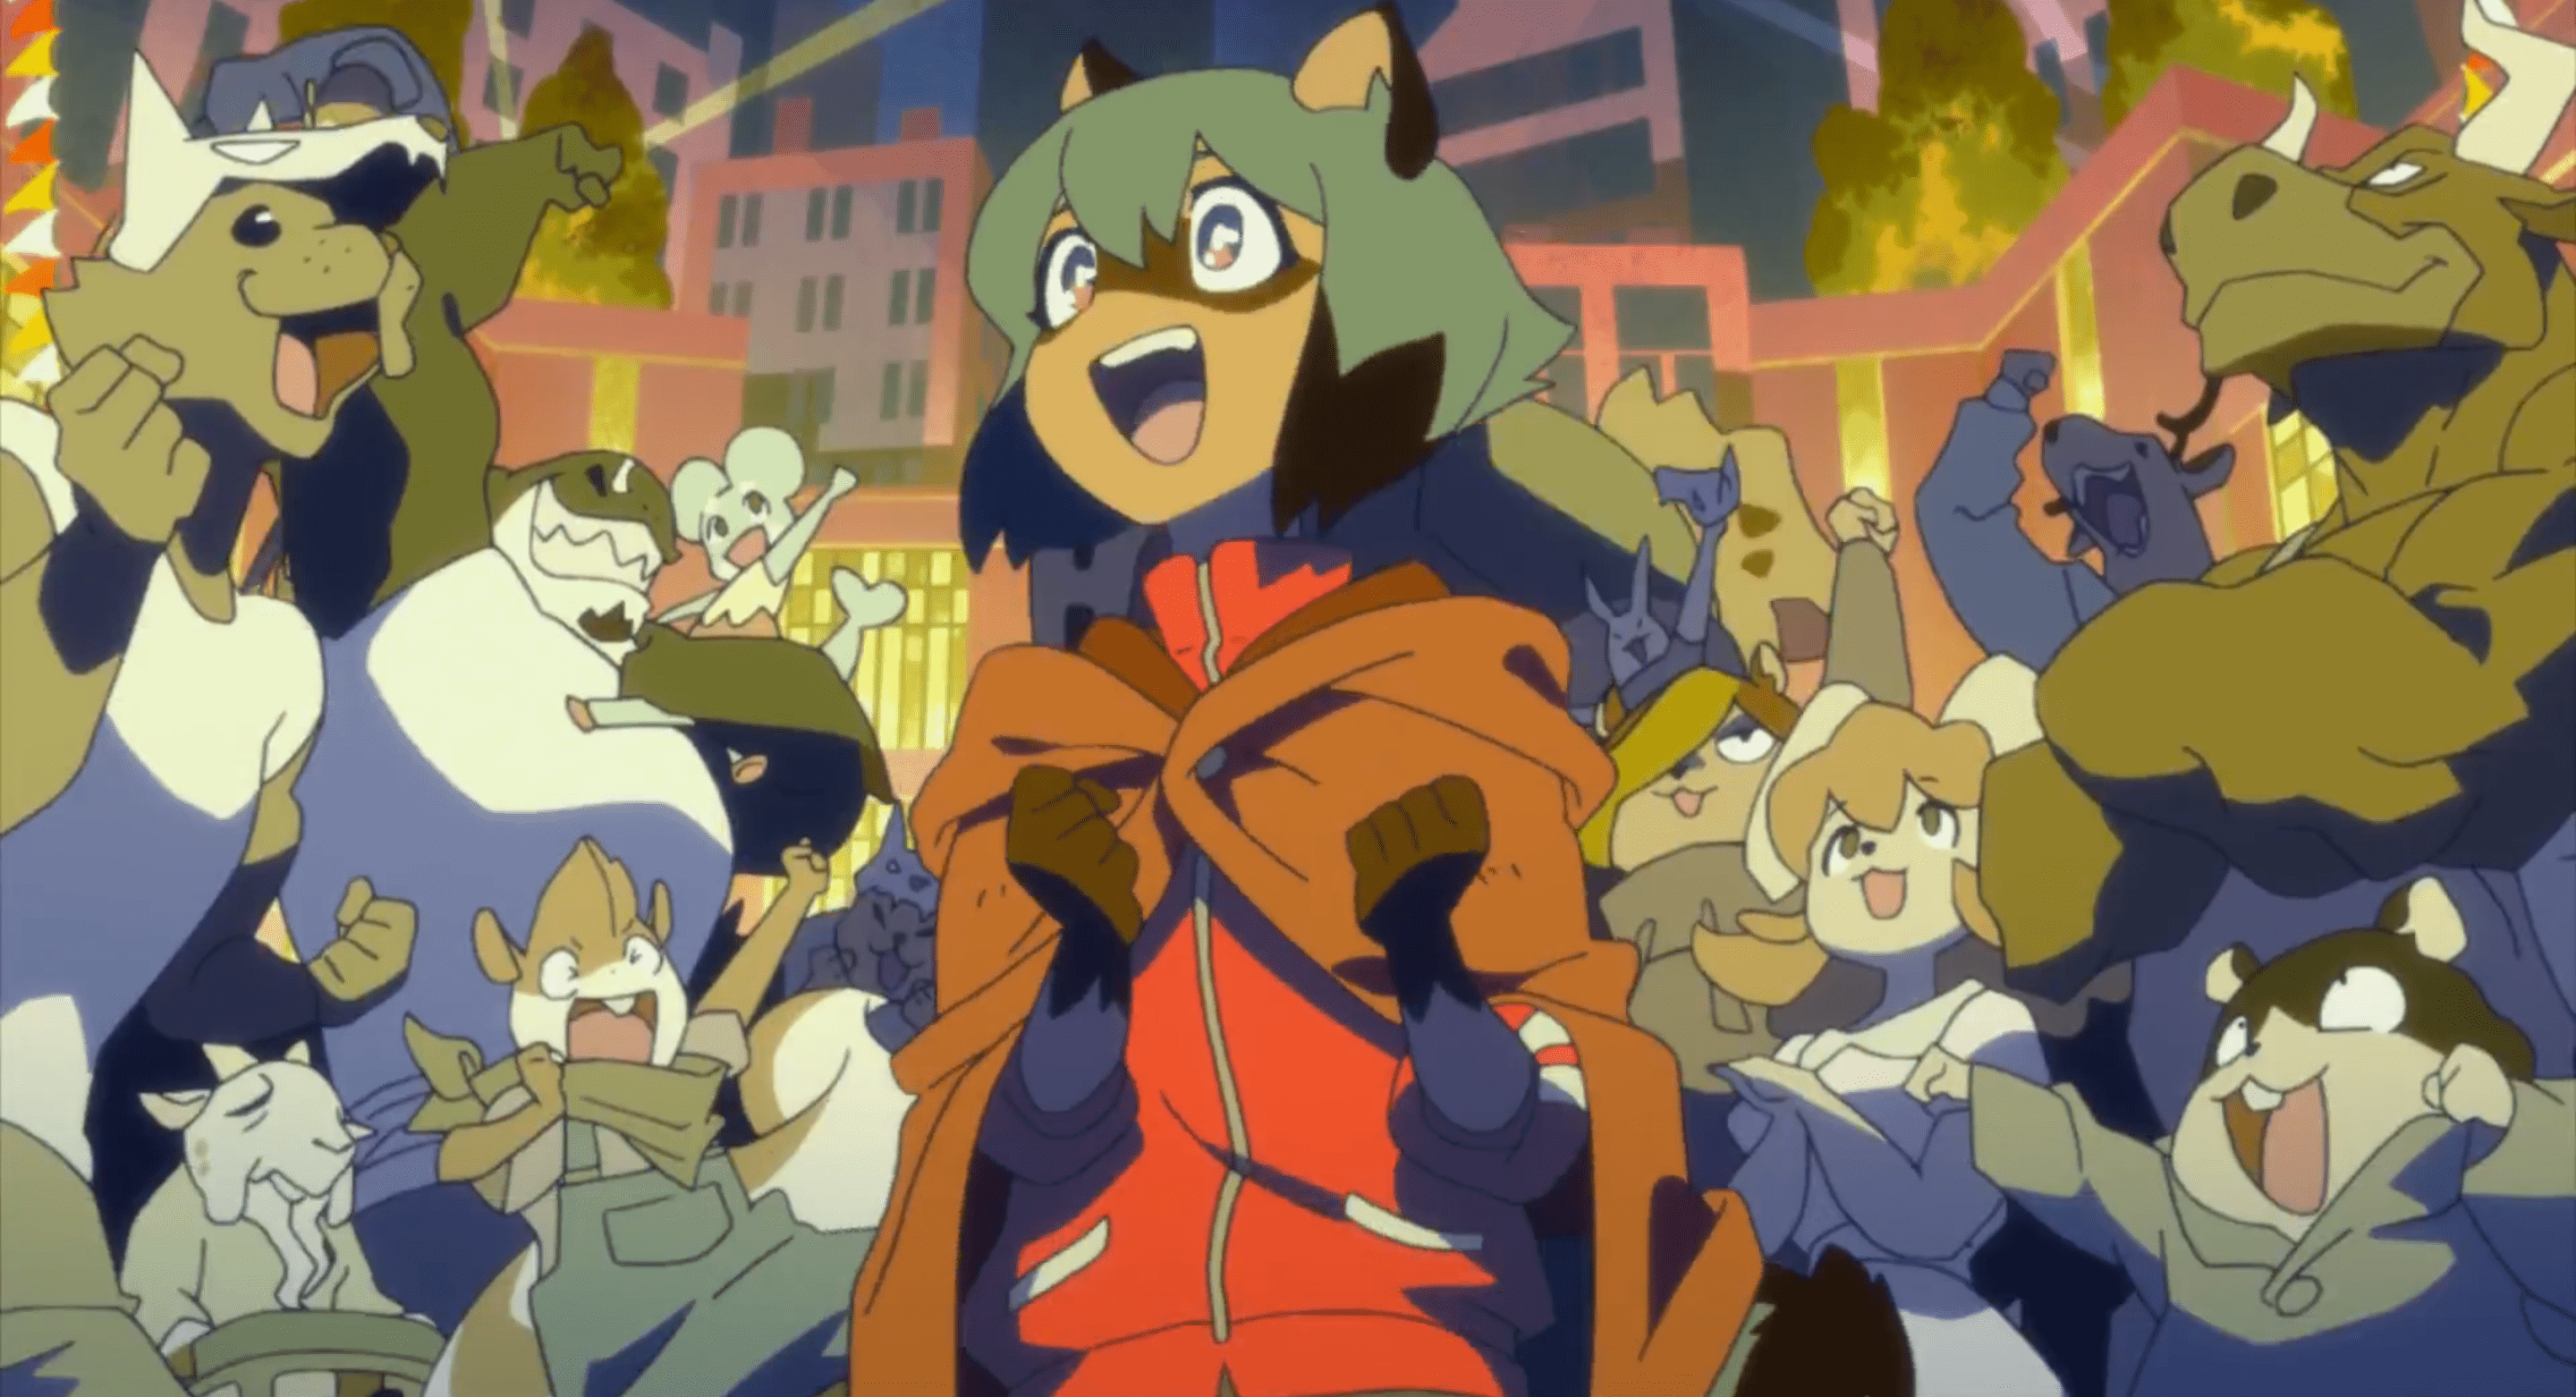 Strange I find people here in the anime that hate Furries